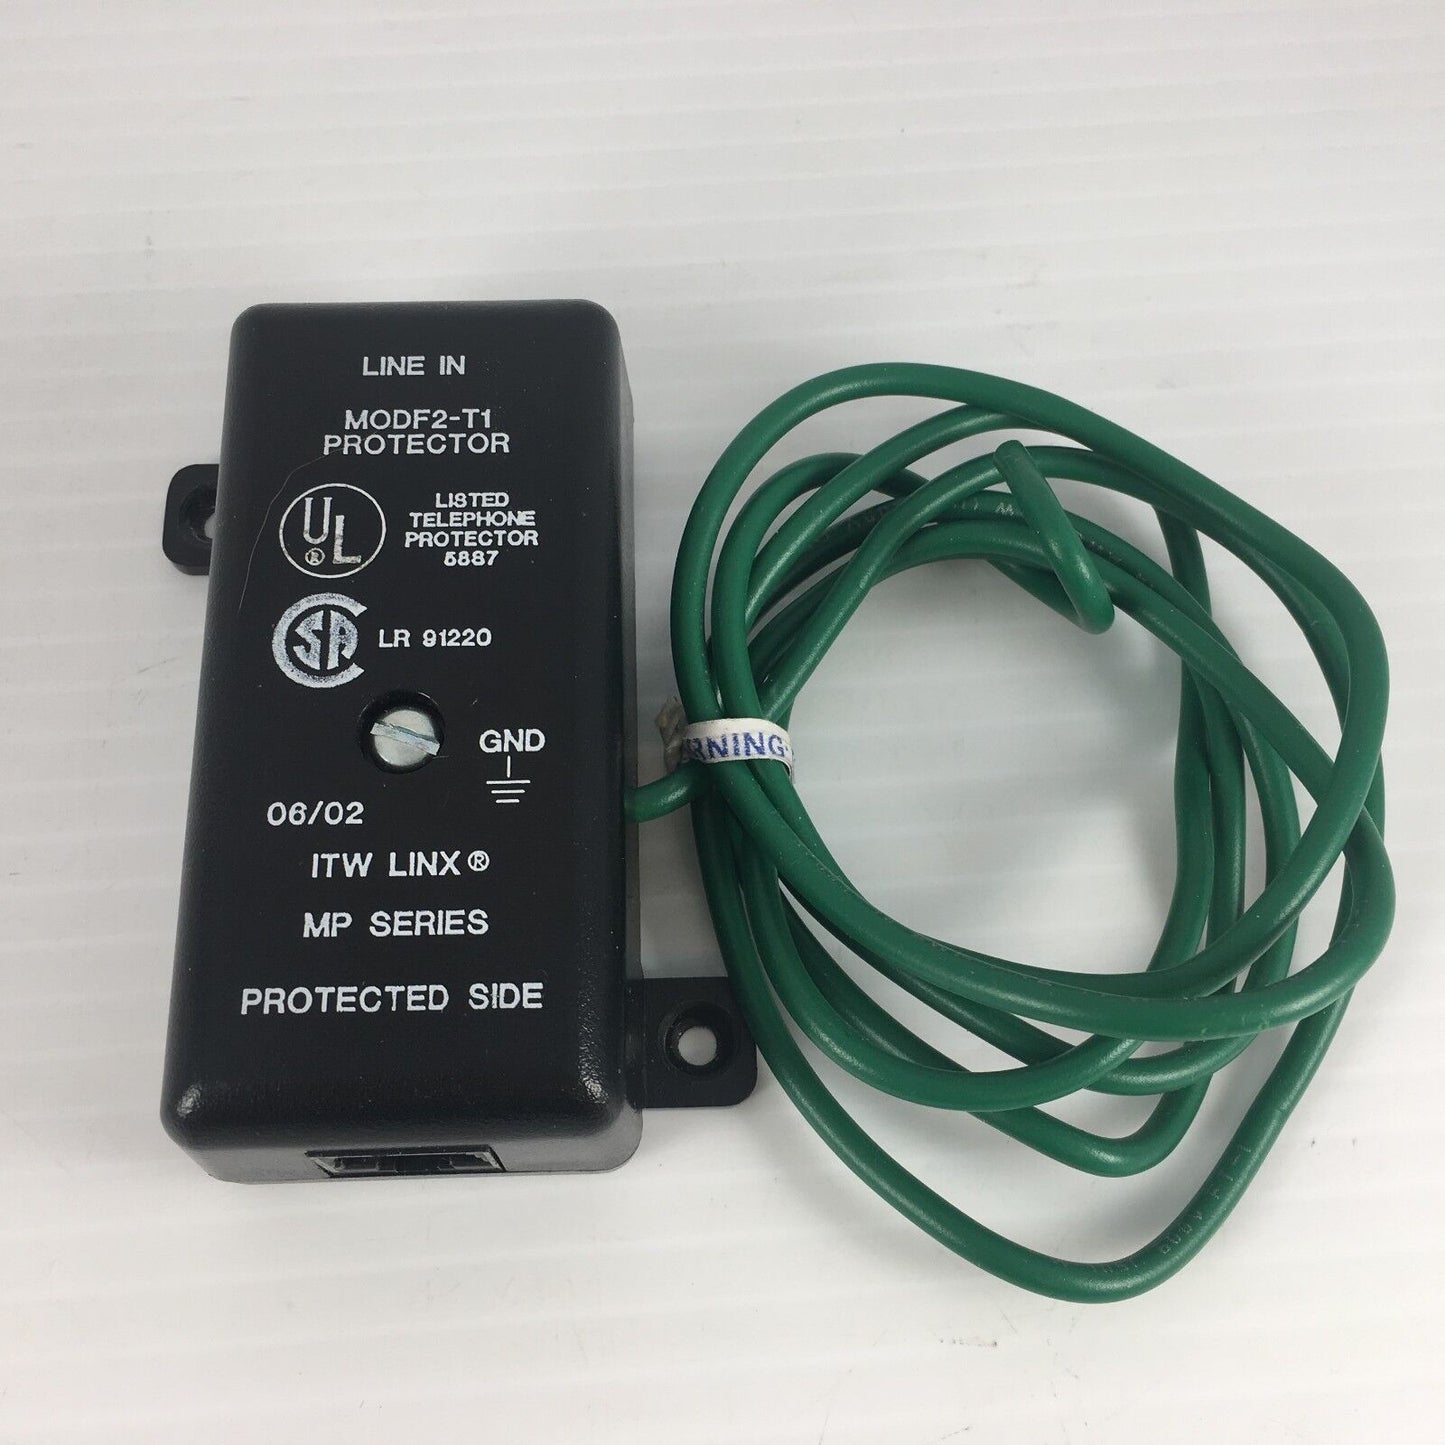 ITW LINX MODF2-T1